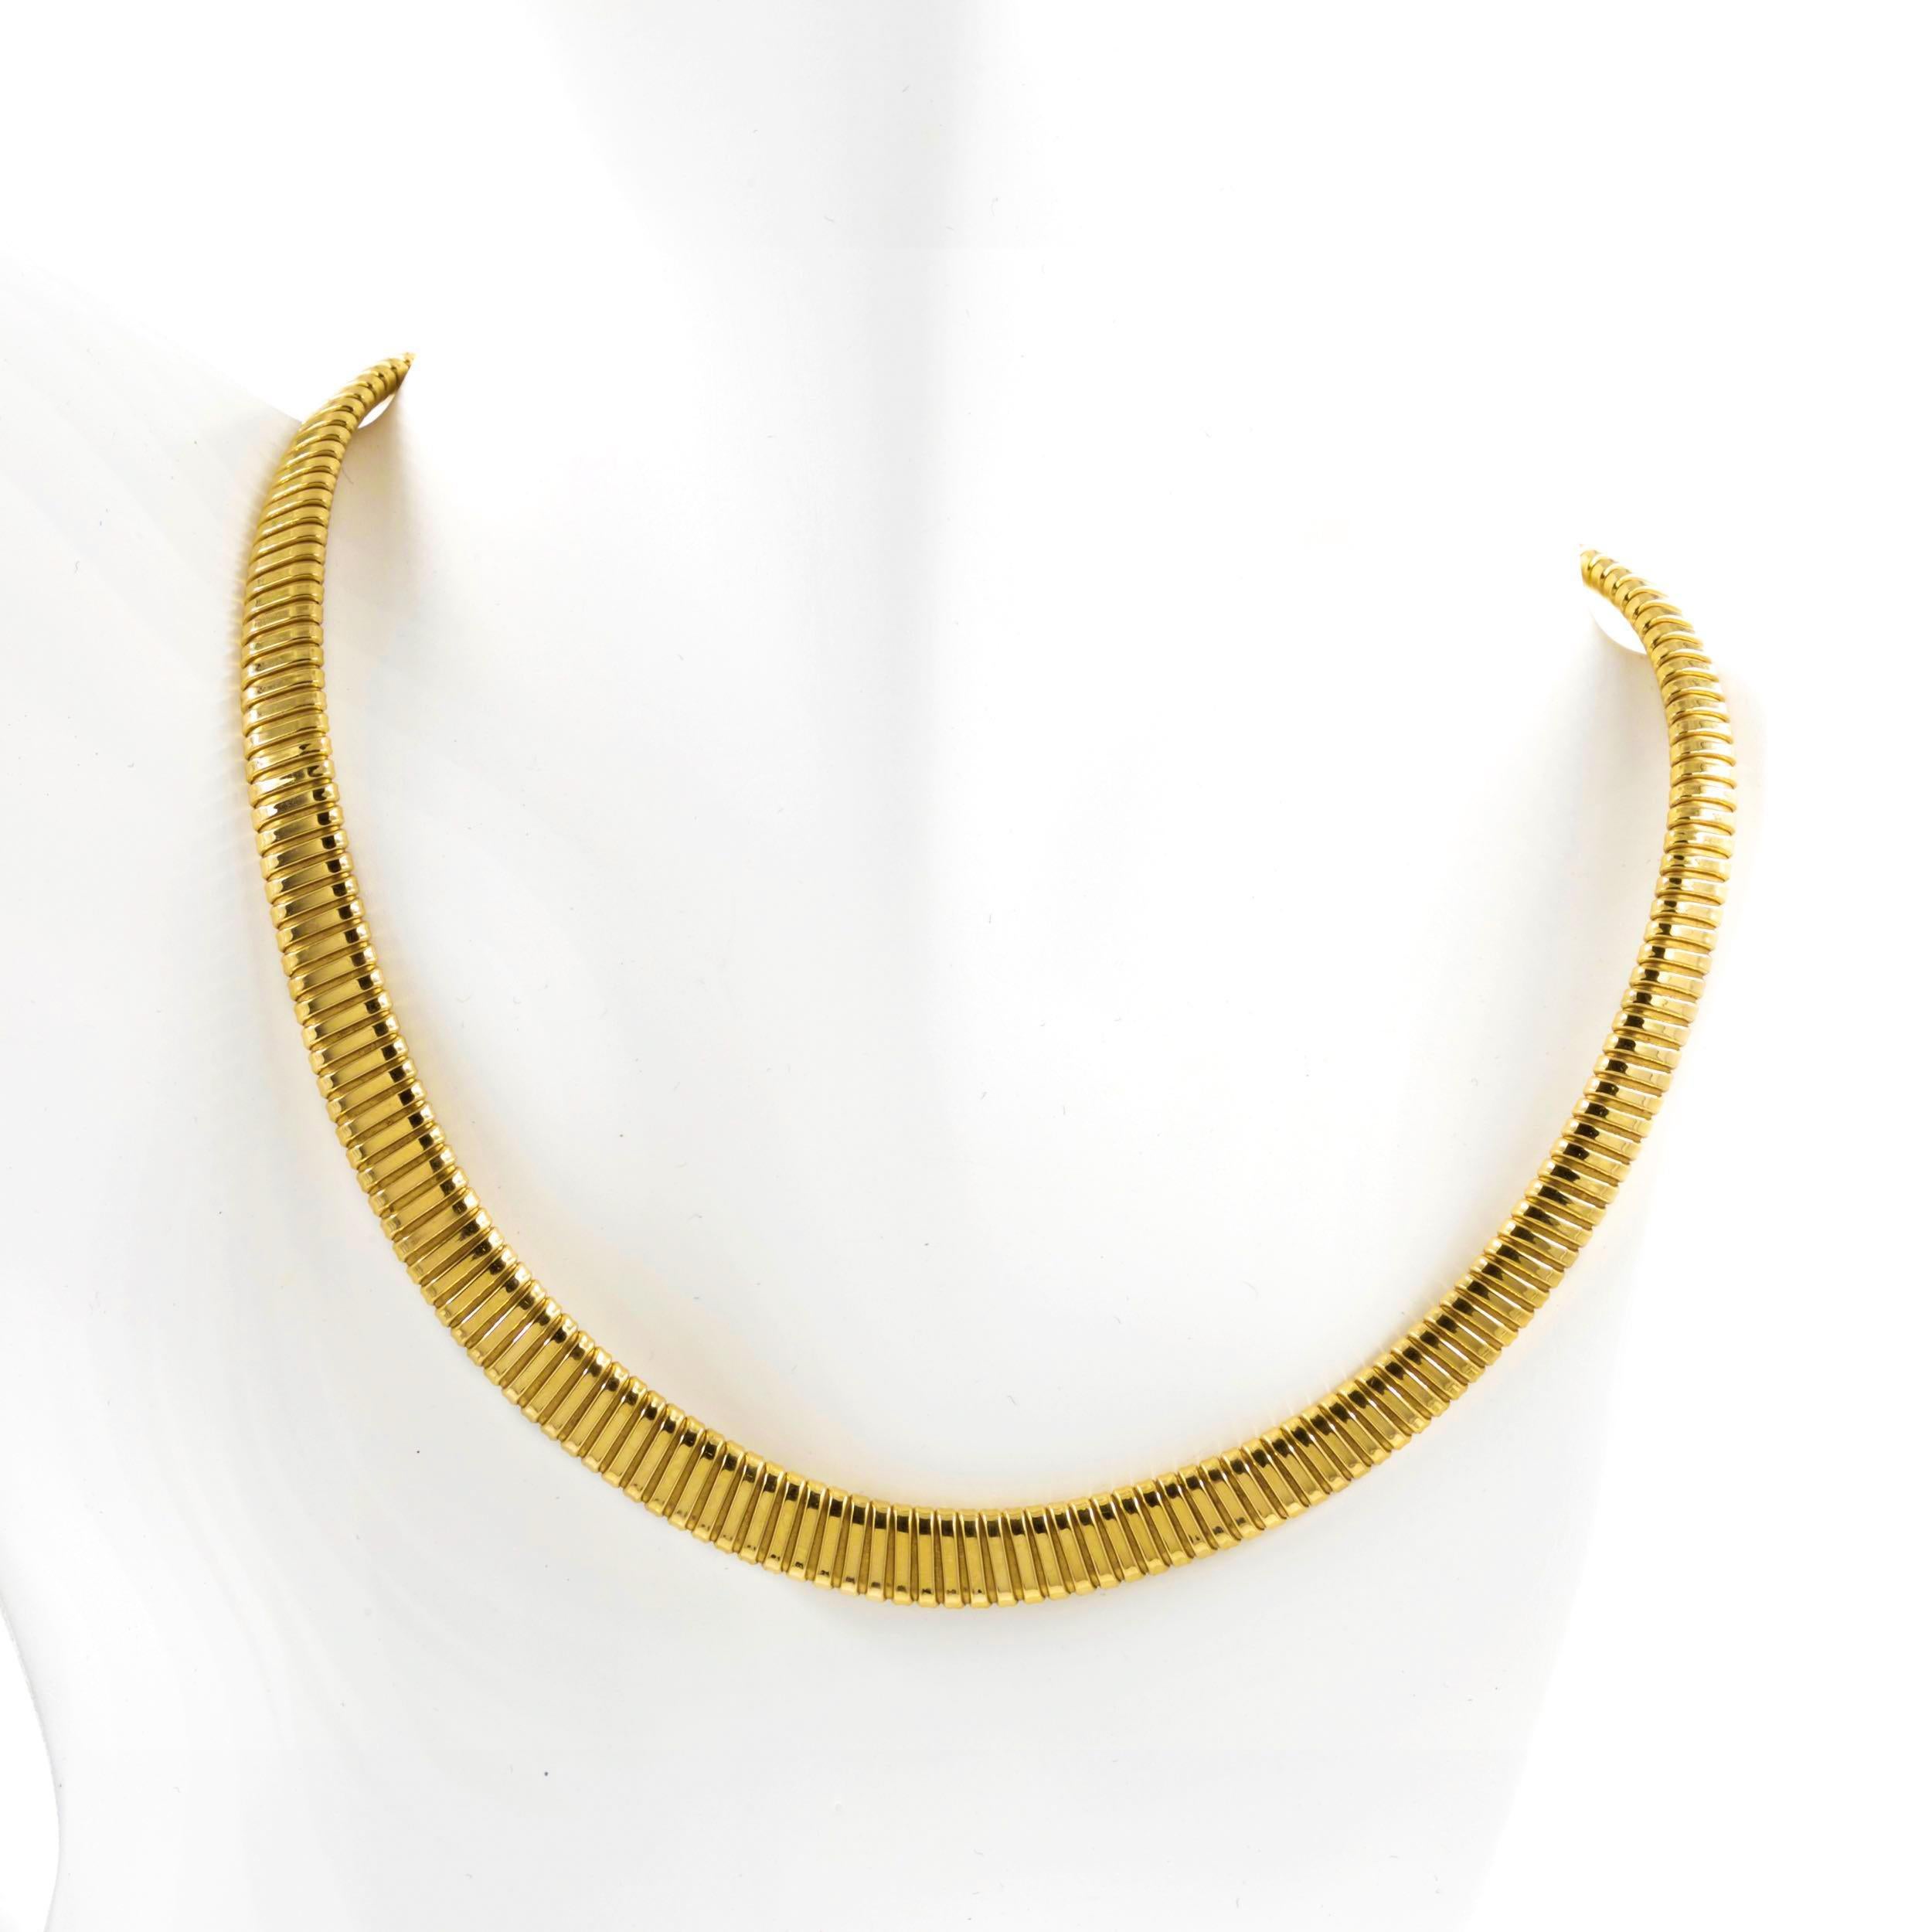 An absolutely gorgeous omega flexible-link choker necklace made by Campi Lino of Vincentino, Italy during the 1960s, this fine piece is crafted of 18k yellow gold with graduated links that shift and flex beautifully for comfort. It is secured with a